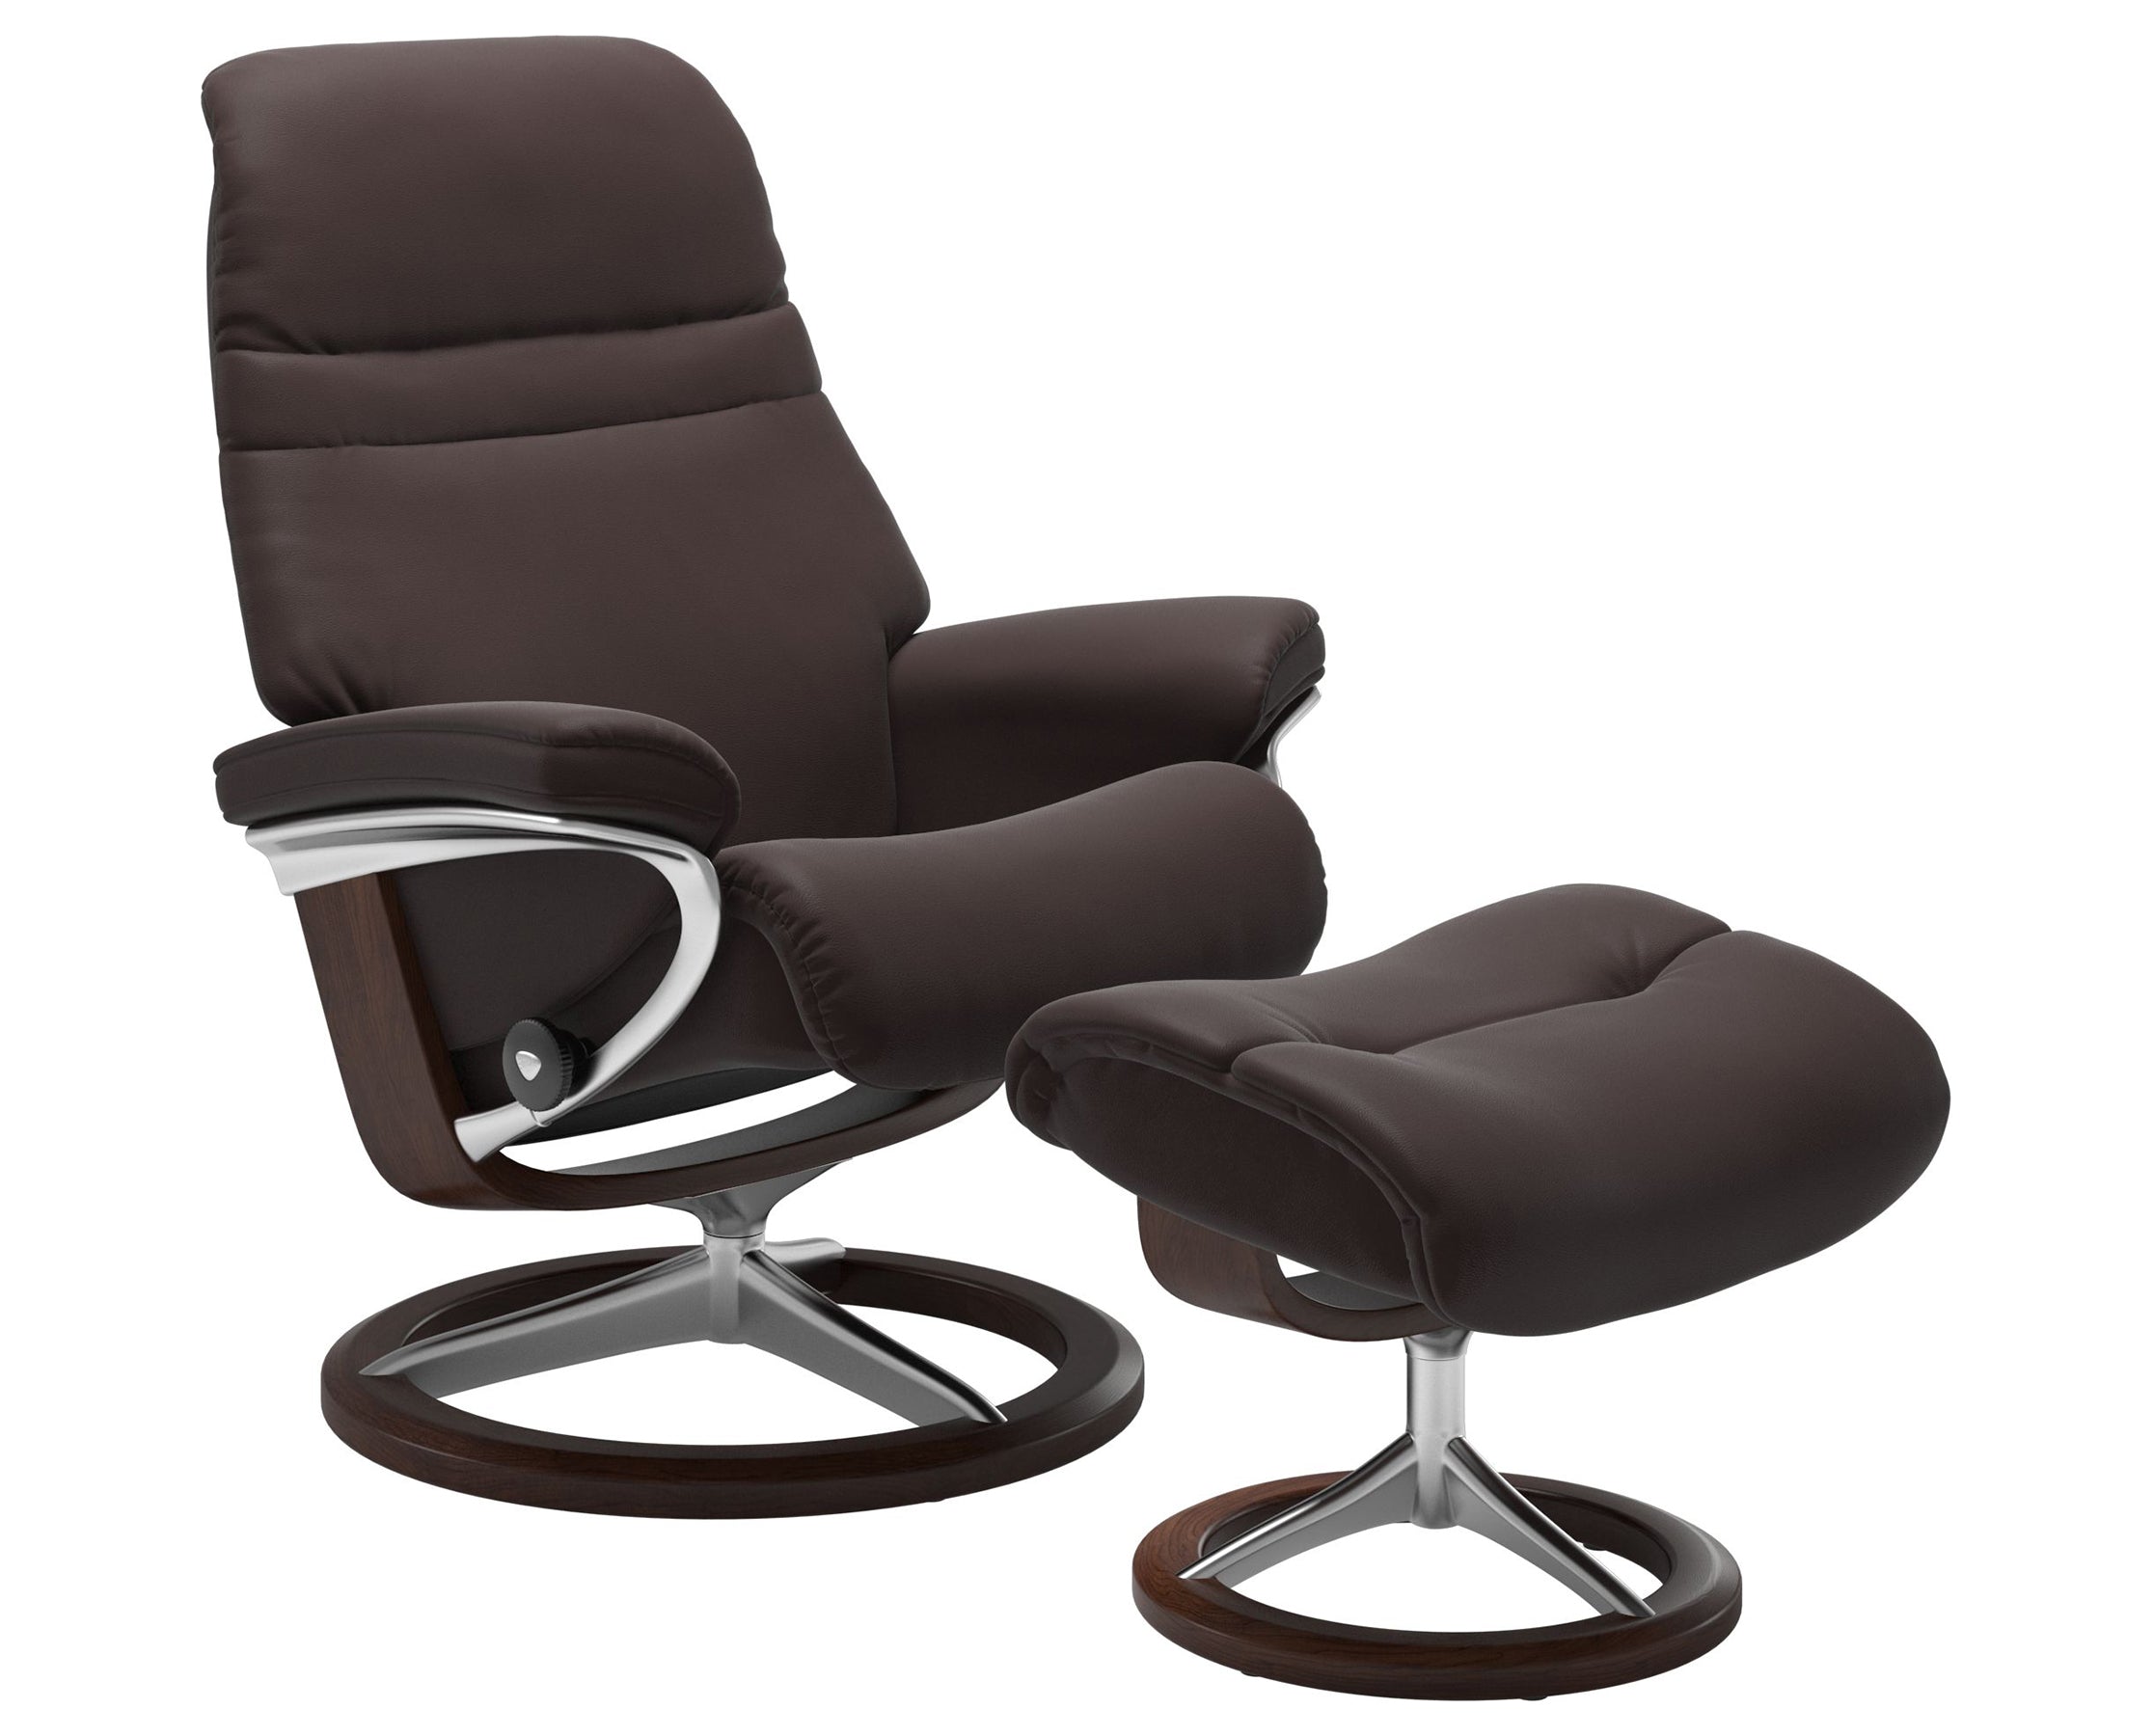 Paloma Leather Chocolate S/M/L and Brown Base | Stressless Sunrise Signature Recliner | Valley Ridge Furniture